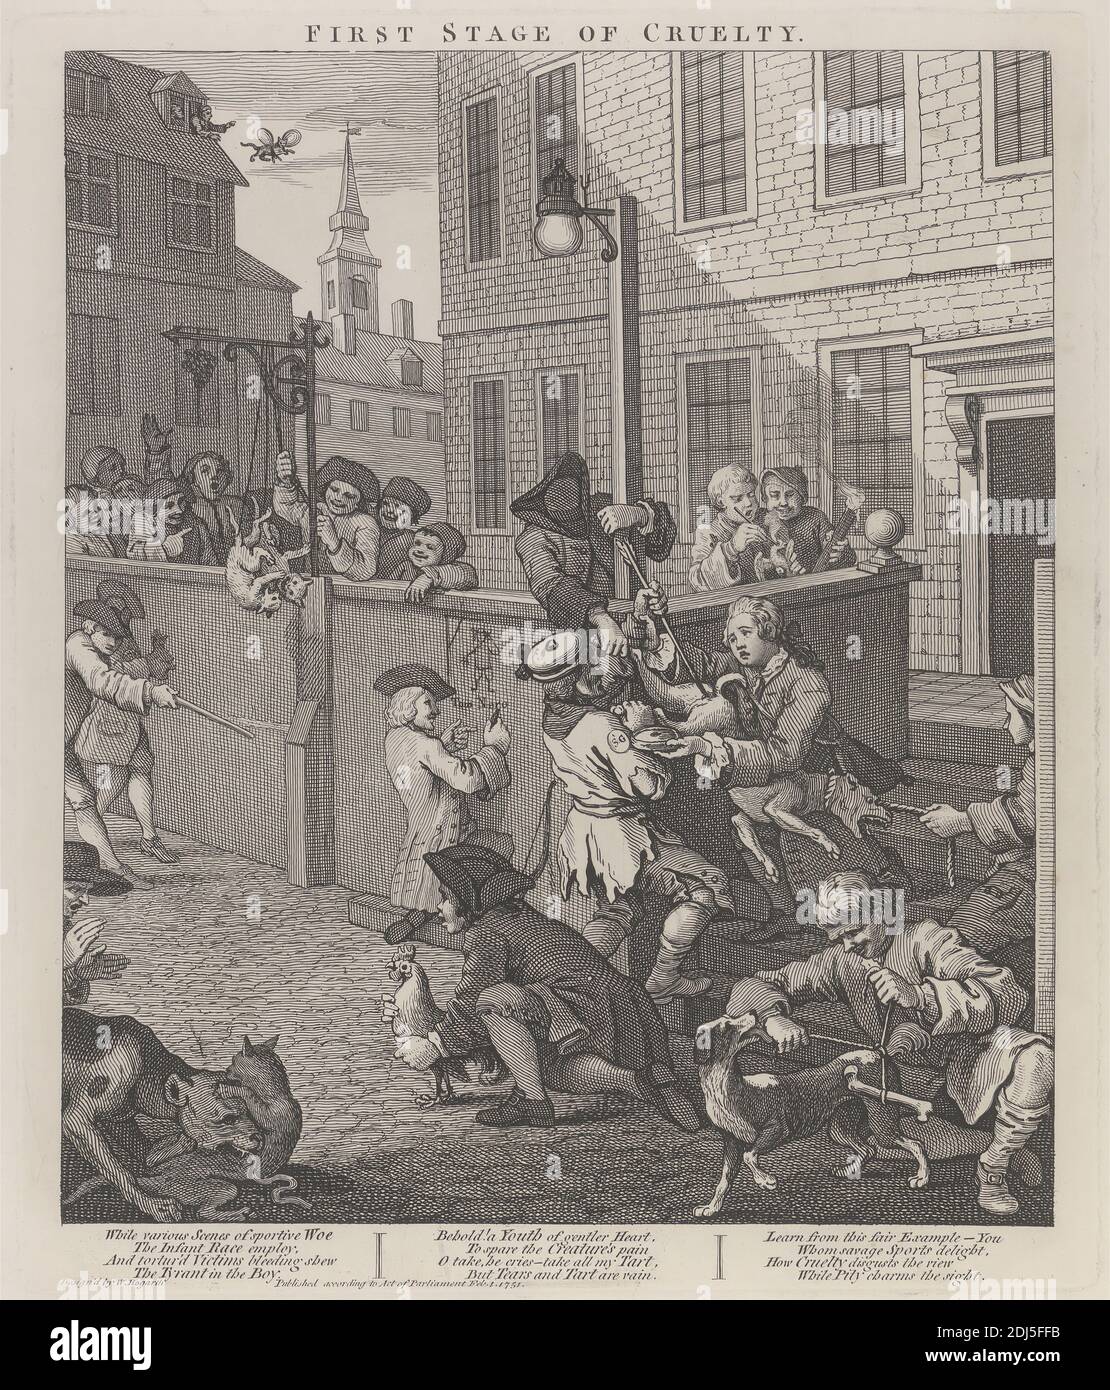 The First Stage of Cruelty: Children Torturing Animals, Print made by William Hogarth, 1697–1764, British, 1751, printed 1790, Line engraving on thick, white, smooth wove paper, Sheet: 24 7/8 x 19 1/4 inches (63.2 x 48.9 cm), Plate: 15 1/4 x 12 3/4 inches (38.7 x 32.4 cm), and Image: 14 x 11 3/4 inches (35.6 x 29.8 cm), balloon, bone, cats (domestic cats), children, church, cruelty, dogs (animals), genre subject, lamppost, parish, rooster, steeple, street, torture, violence, England, Europe, London, St Giles, United Kingdom Stock Photo